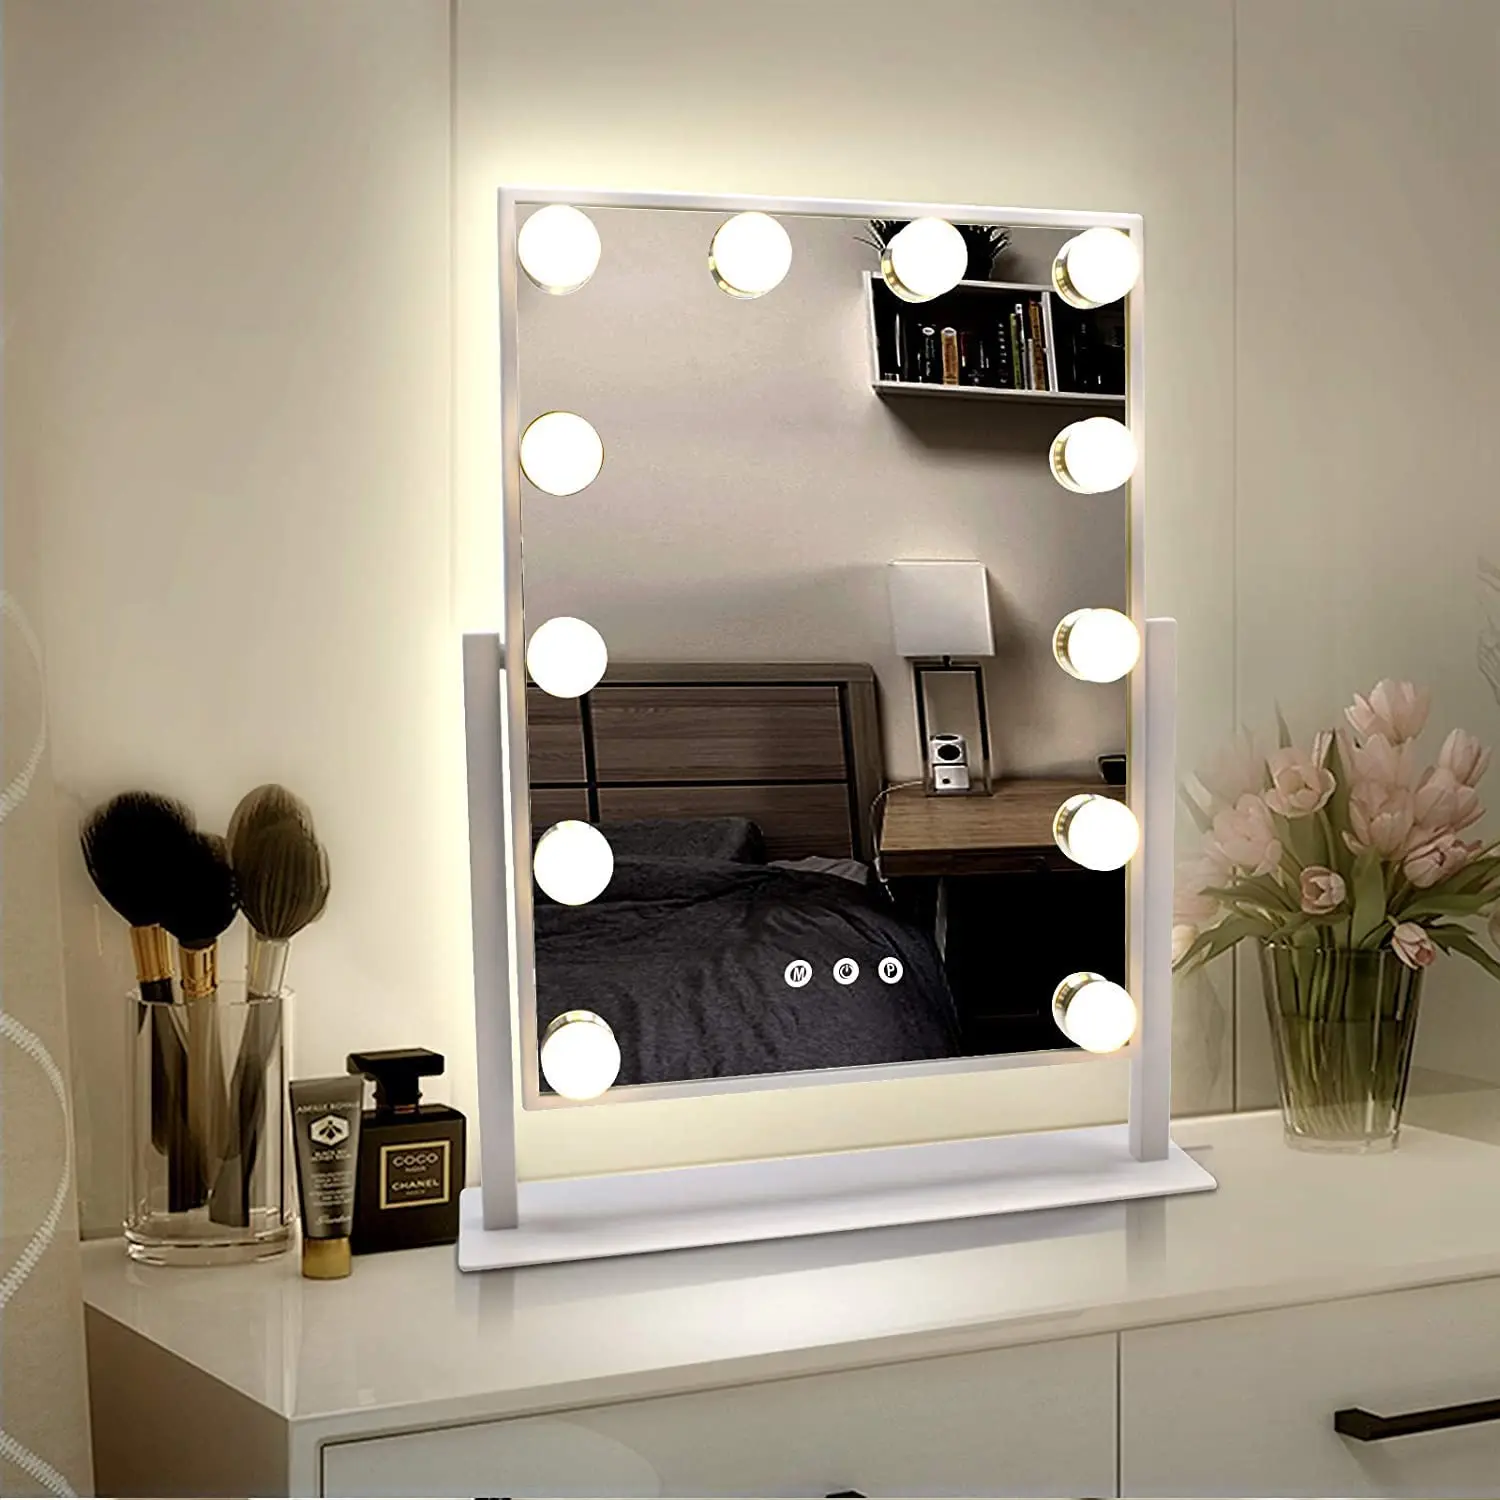 

Hollywood Vanity Mirror with Lights,Lighted Makeup Mirror with 3 Color Light &12 Dimmable Led Bulbs,Touch Control &360° Rotation